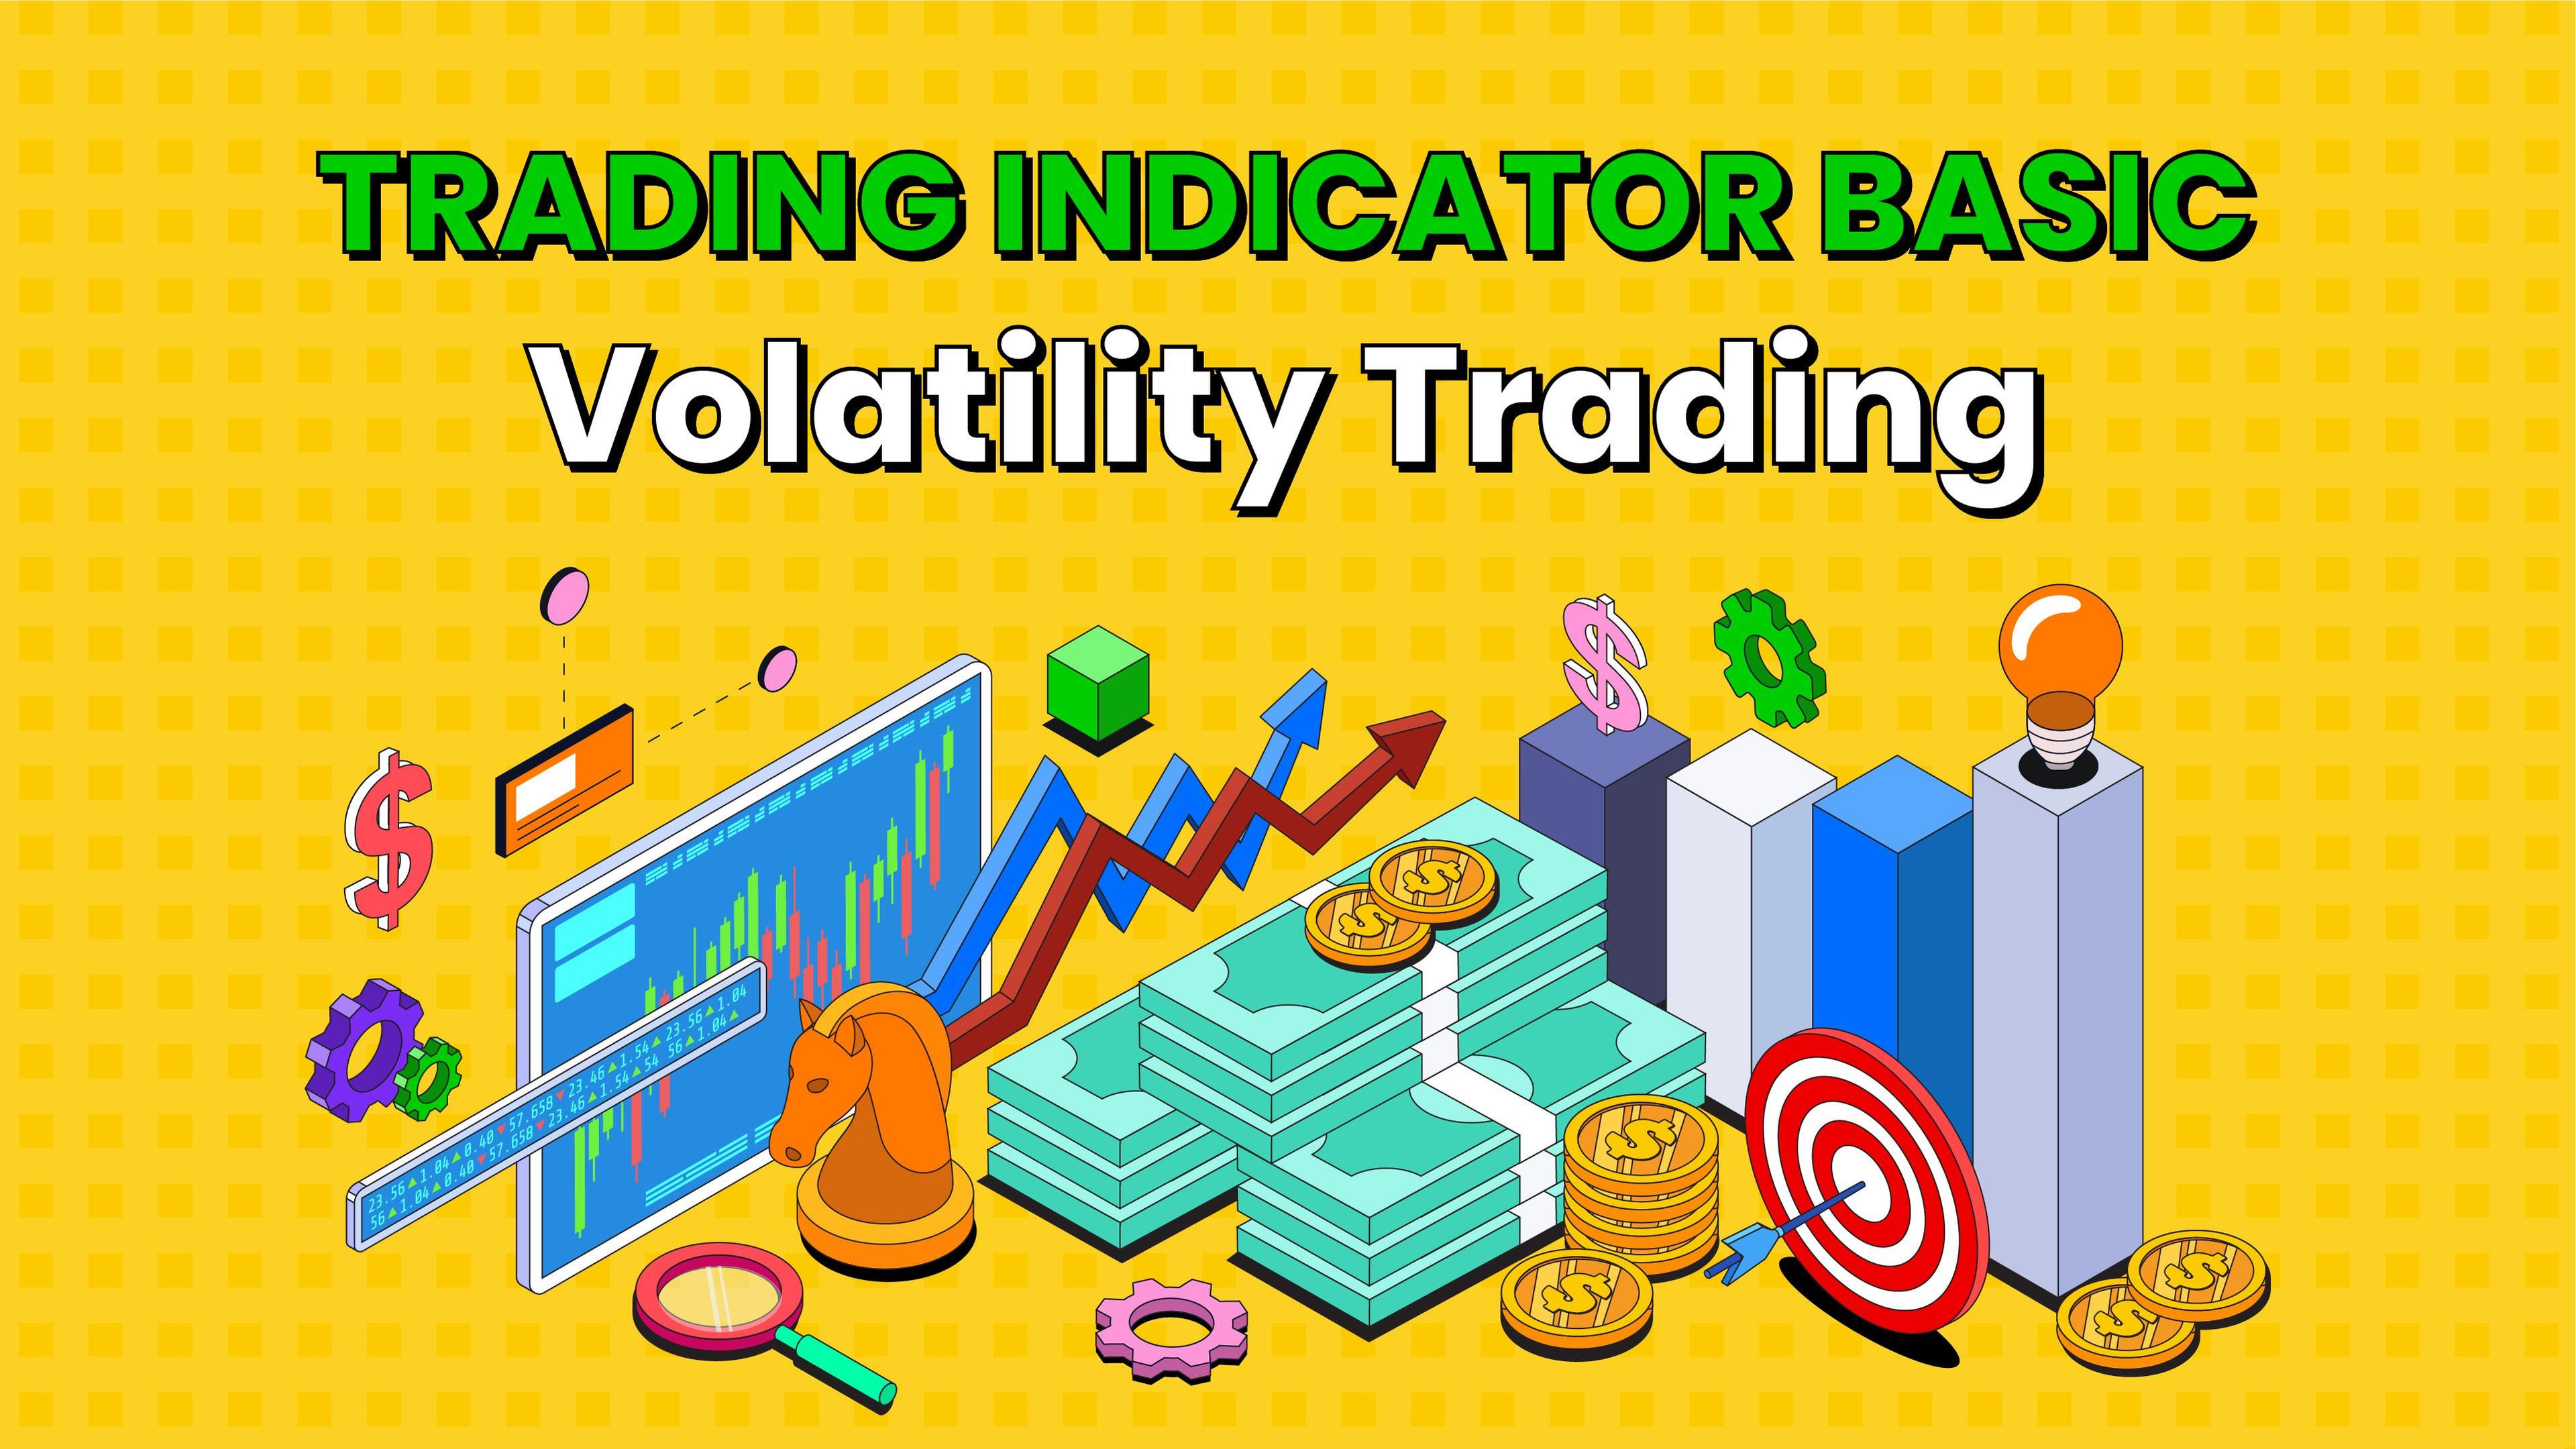 Trading-Volatility-Trading-Feature-Image-6FYYp.jpg